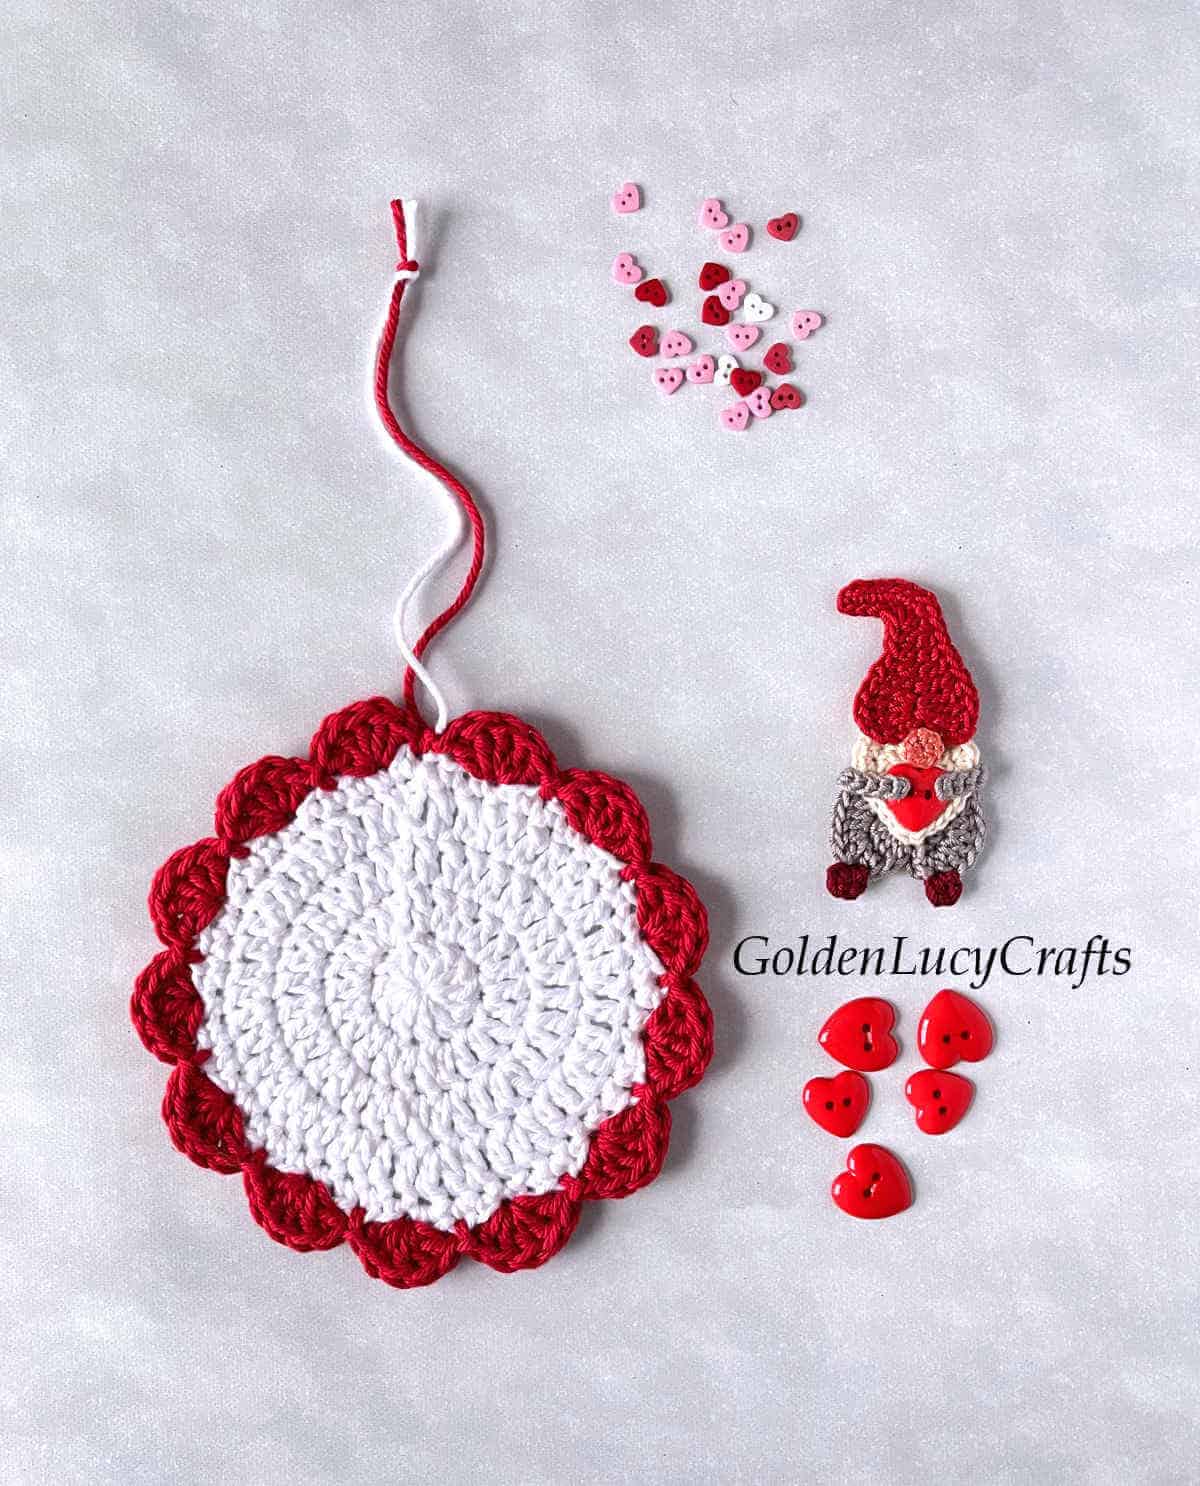 Parts of Valentine's Day crocheted ornament.